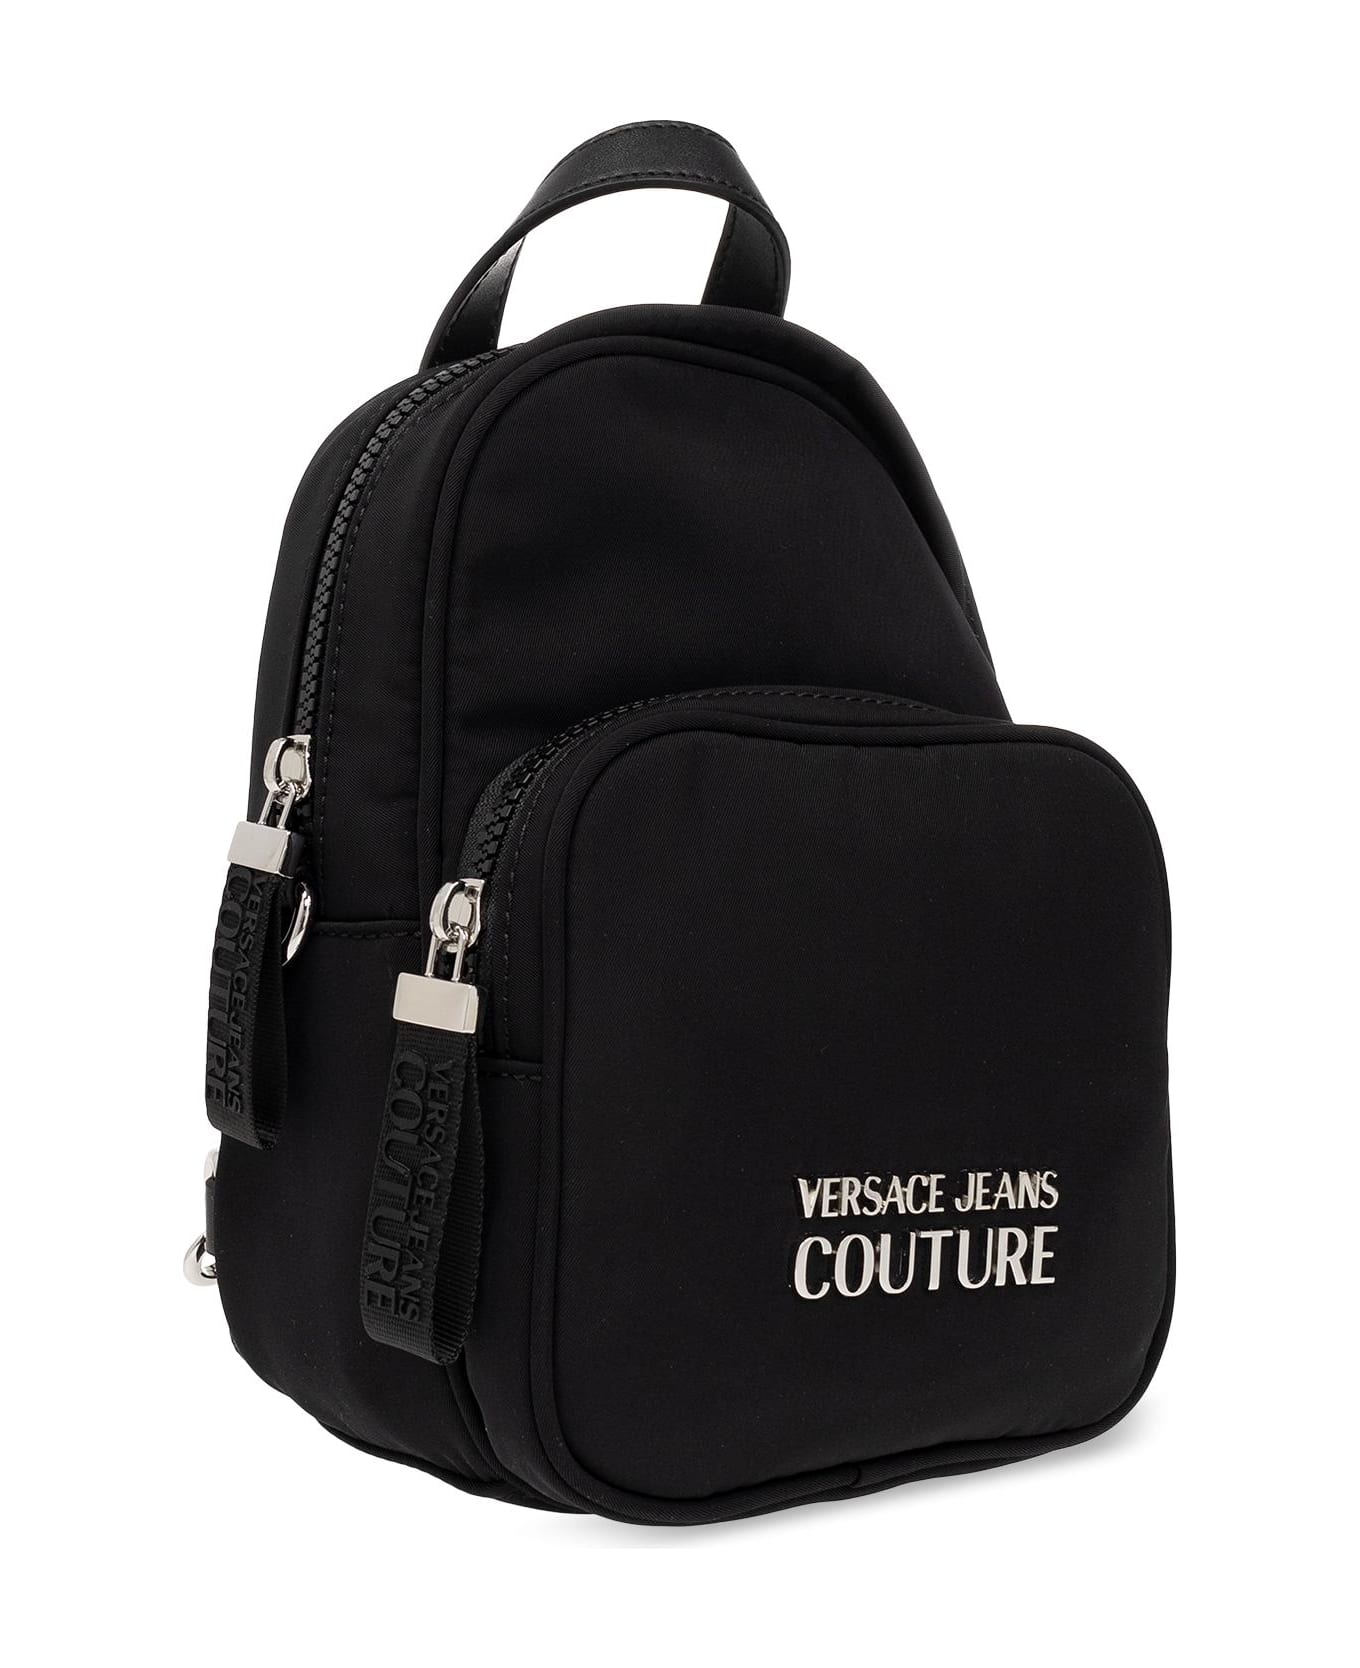 Versace Jeans Couture Backpack With Logo - BLACK